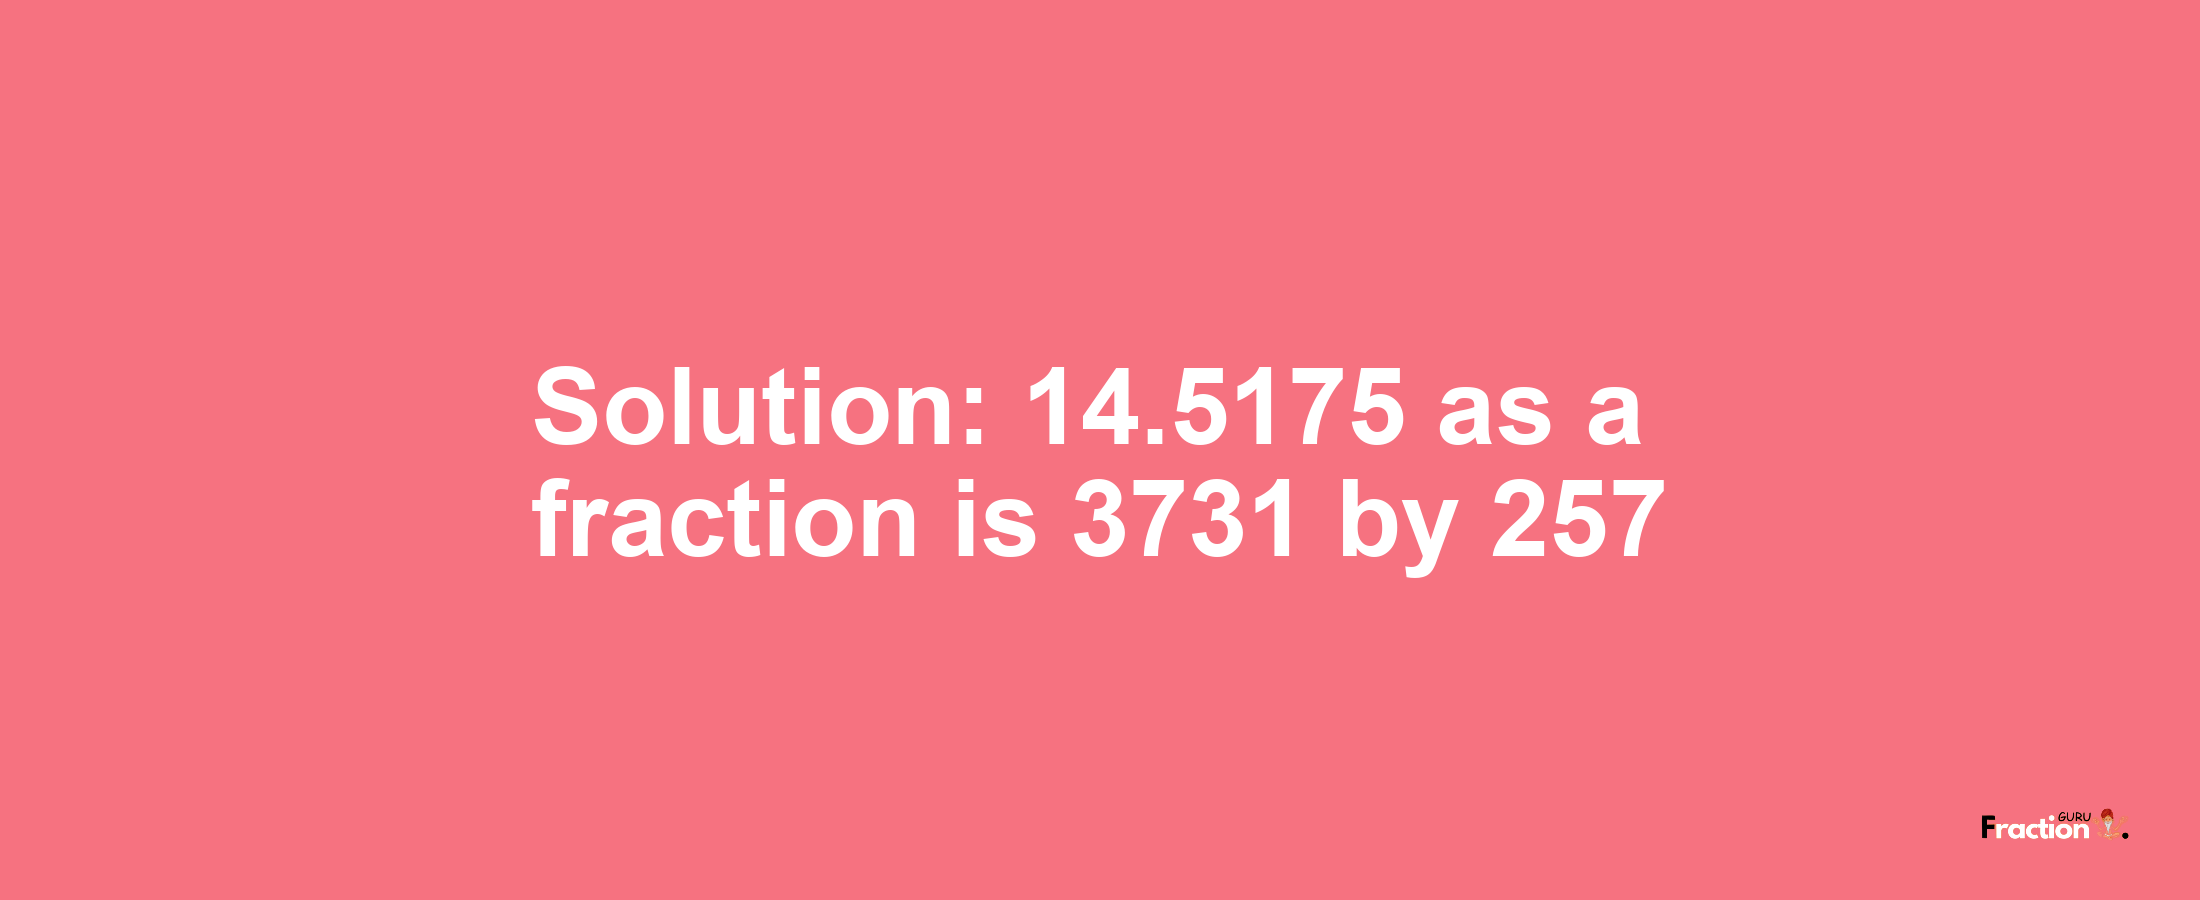 Solution:14.5175 as a fraction is 3731/257